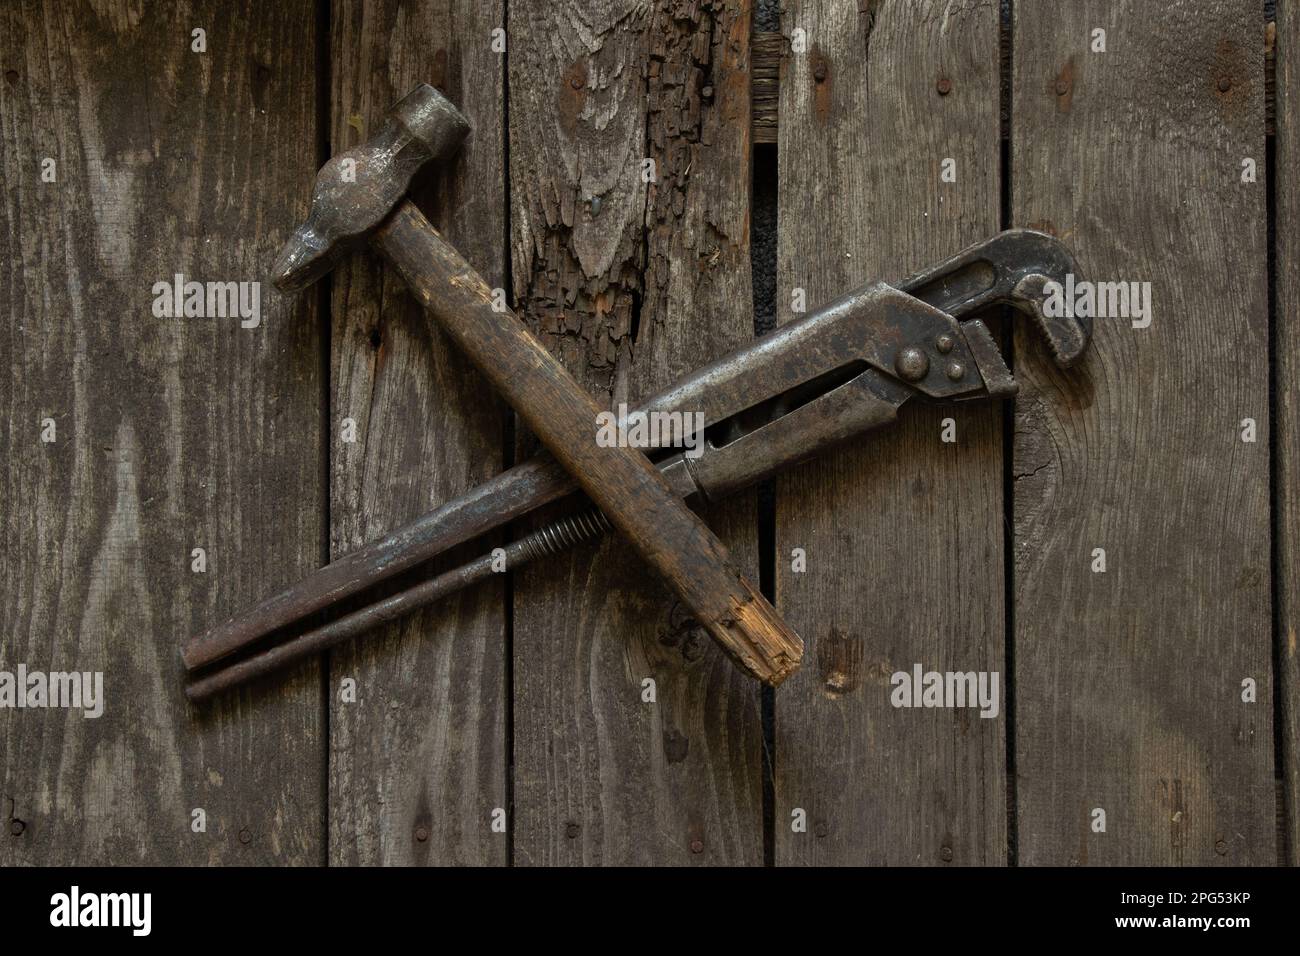 old rusty gas wrench and hammer lie on a wooden table close-up Stock Photo